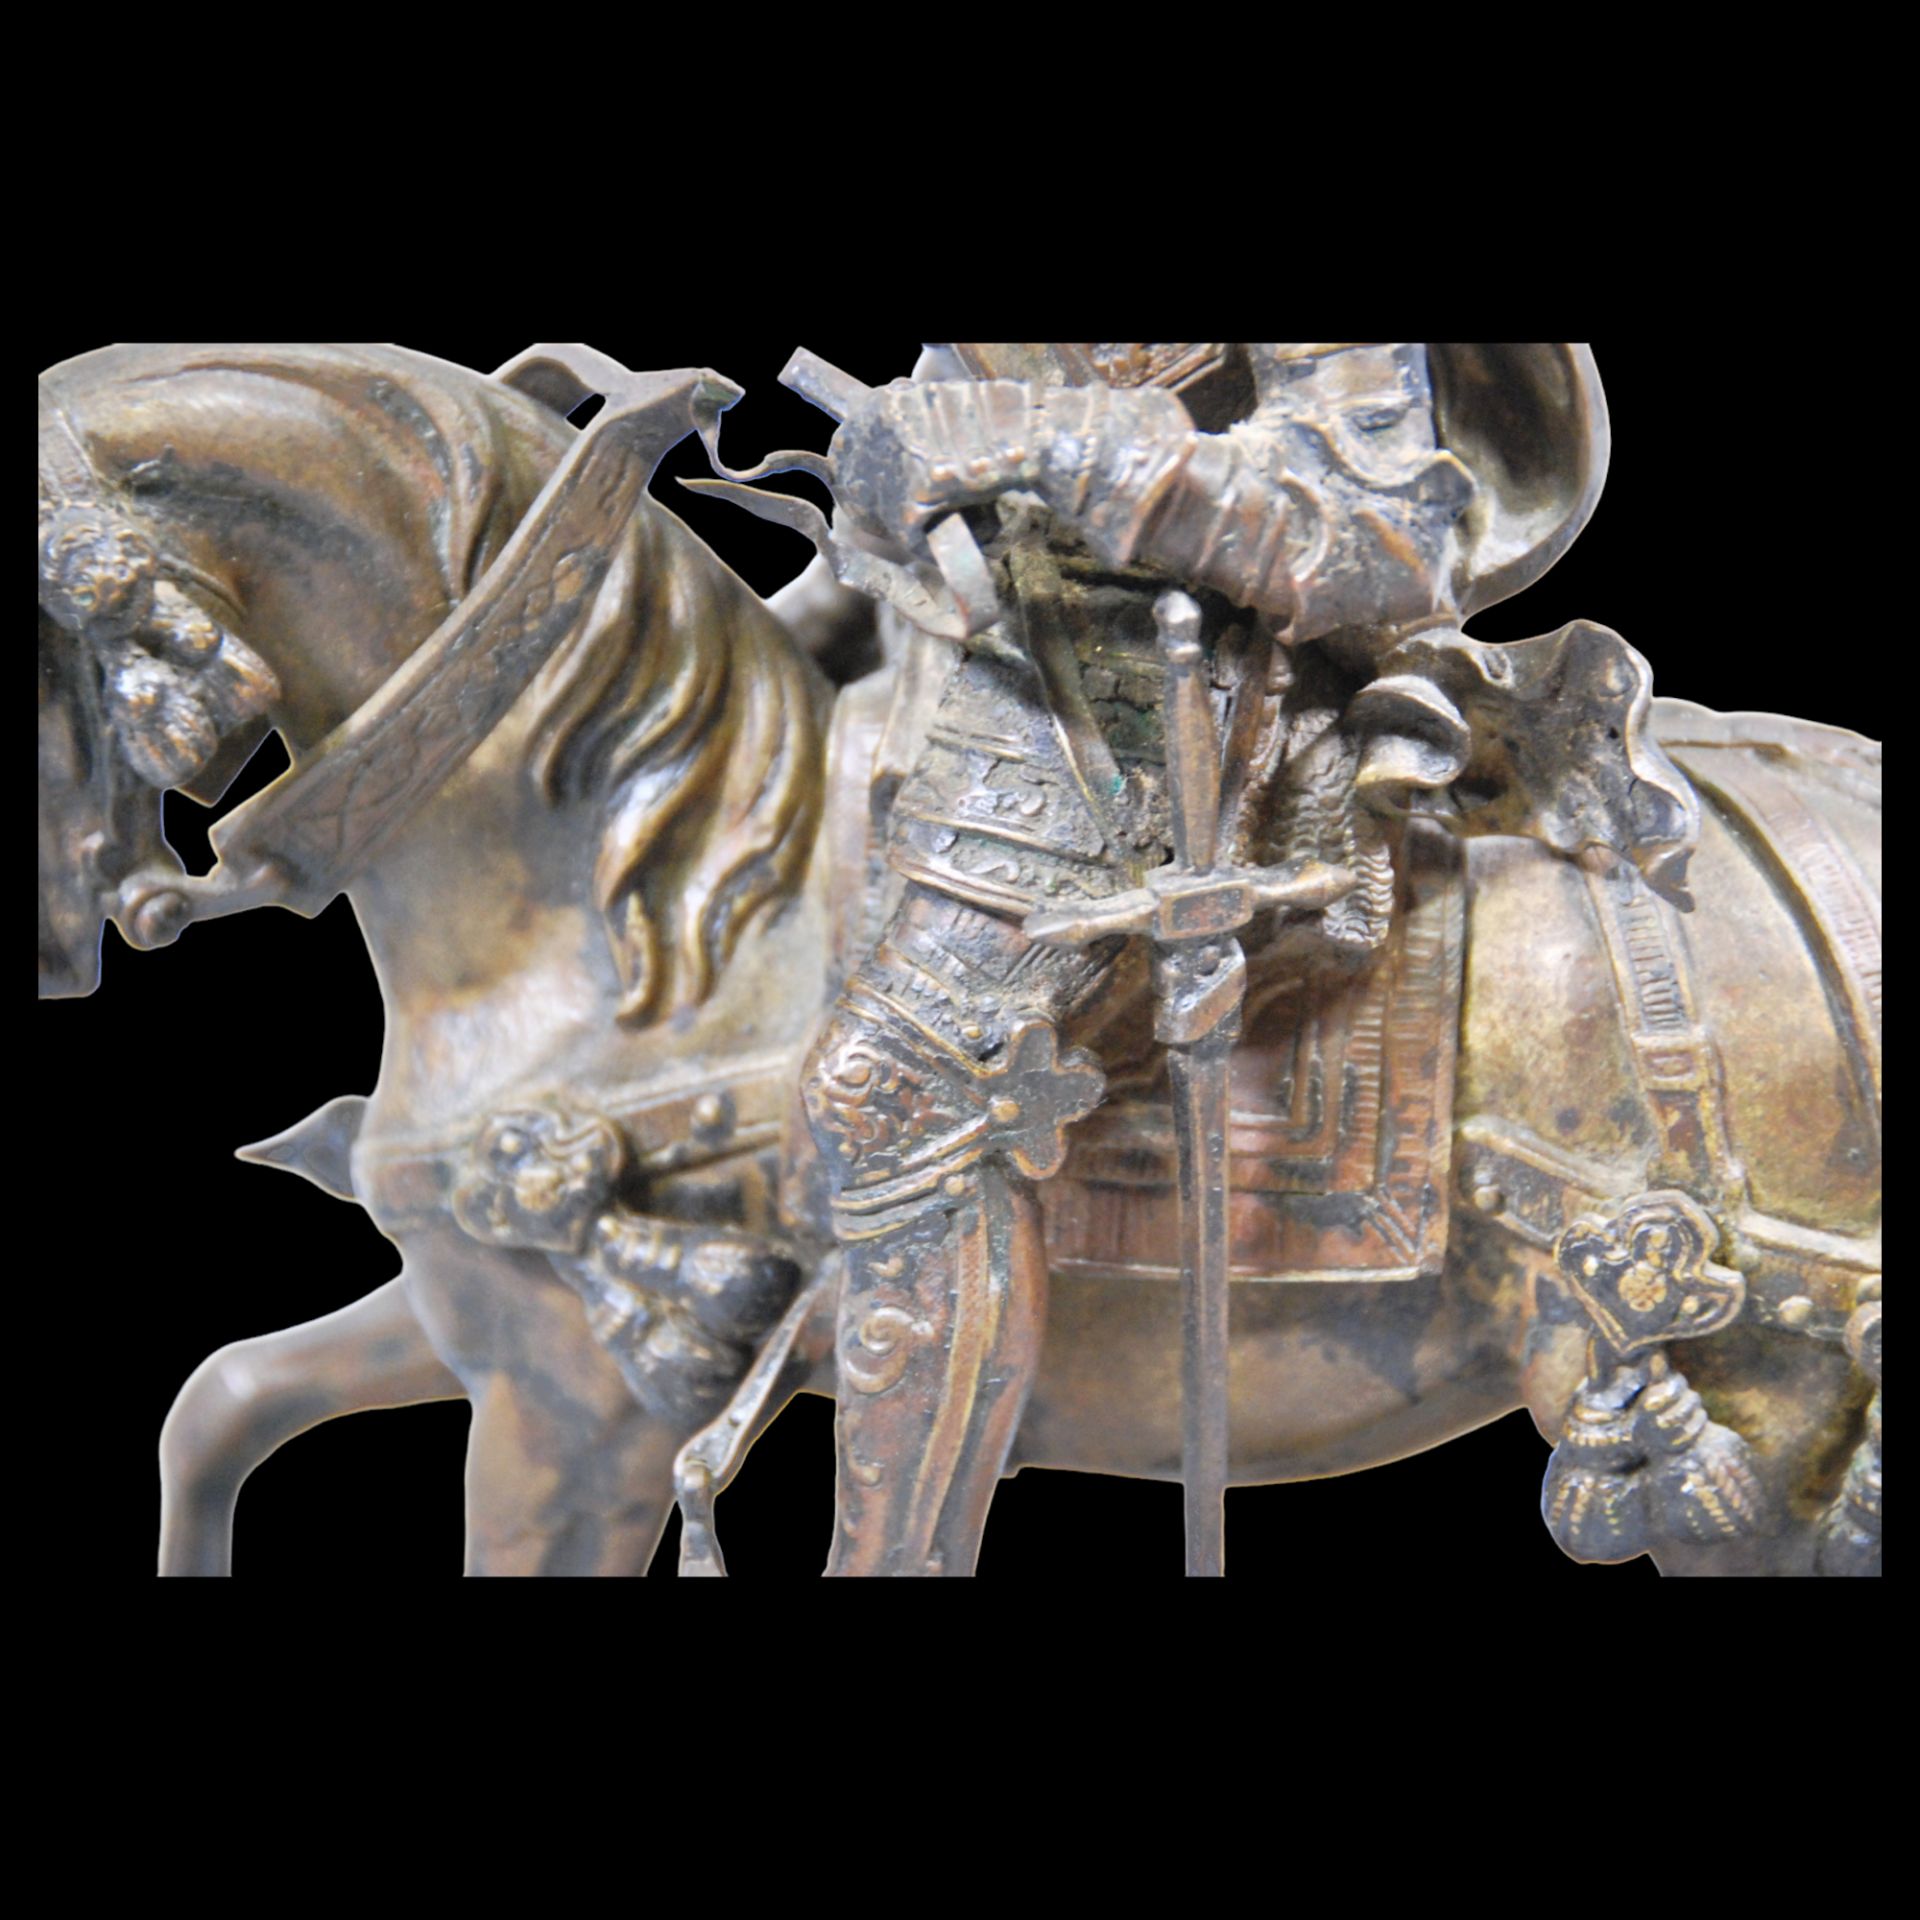 A bronze composition depicting an equestrian knight of the medieval period at a tournament. - Image 5 of 12